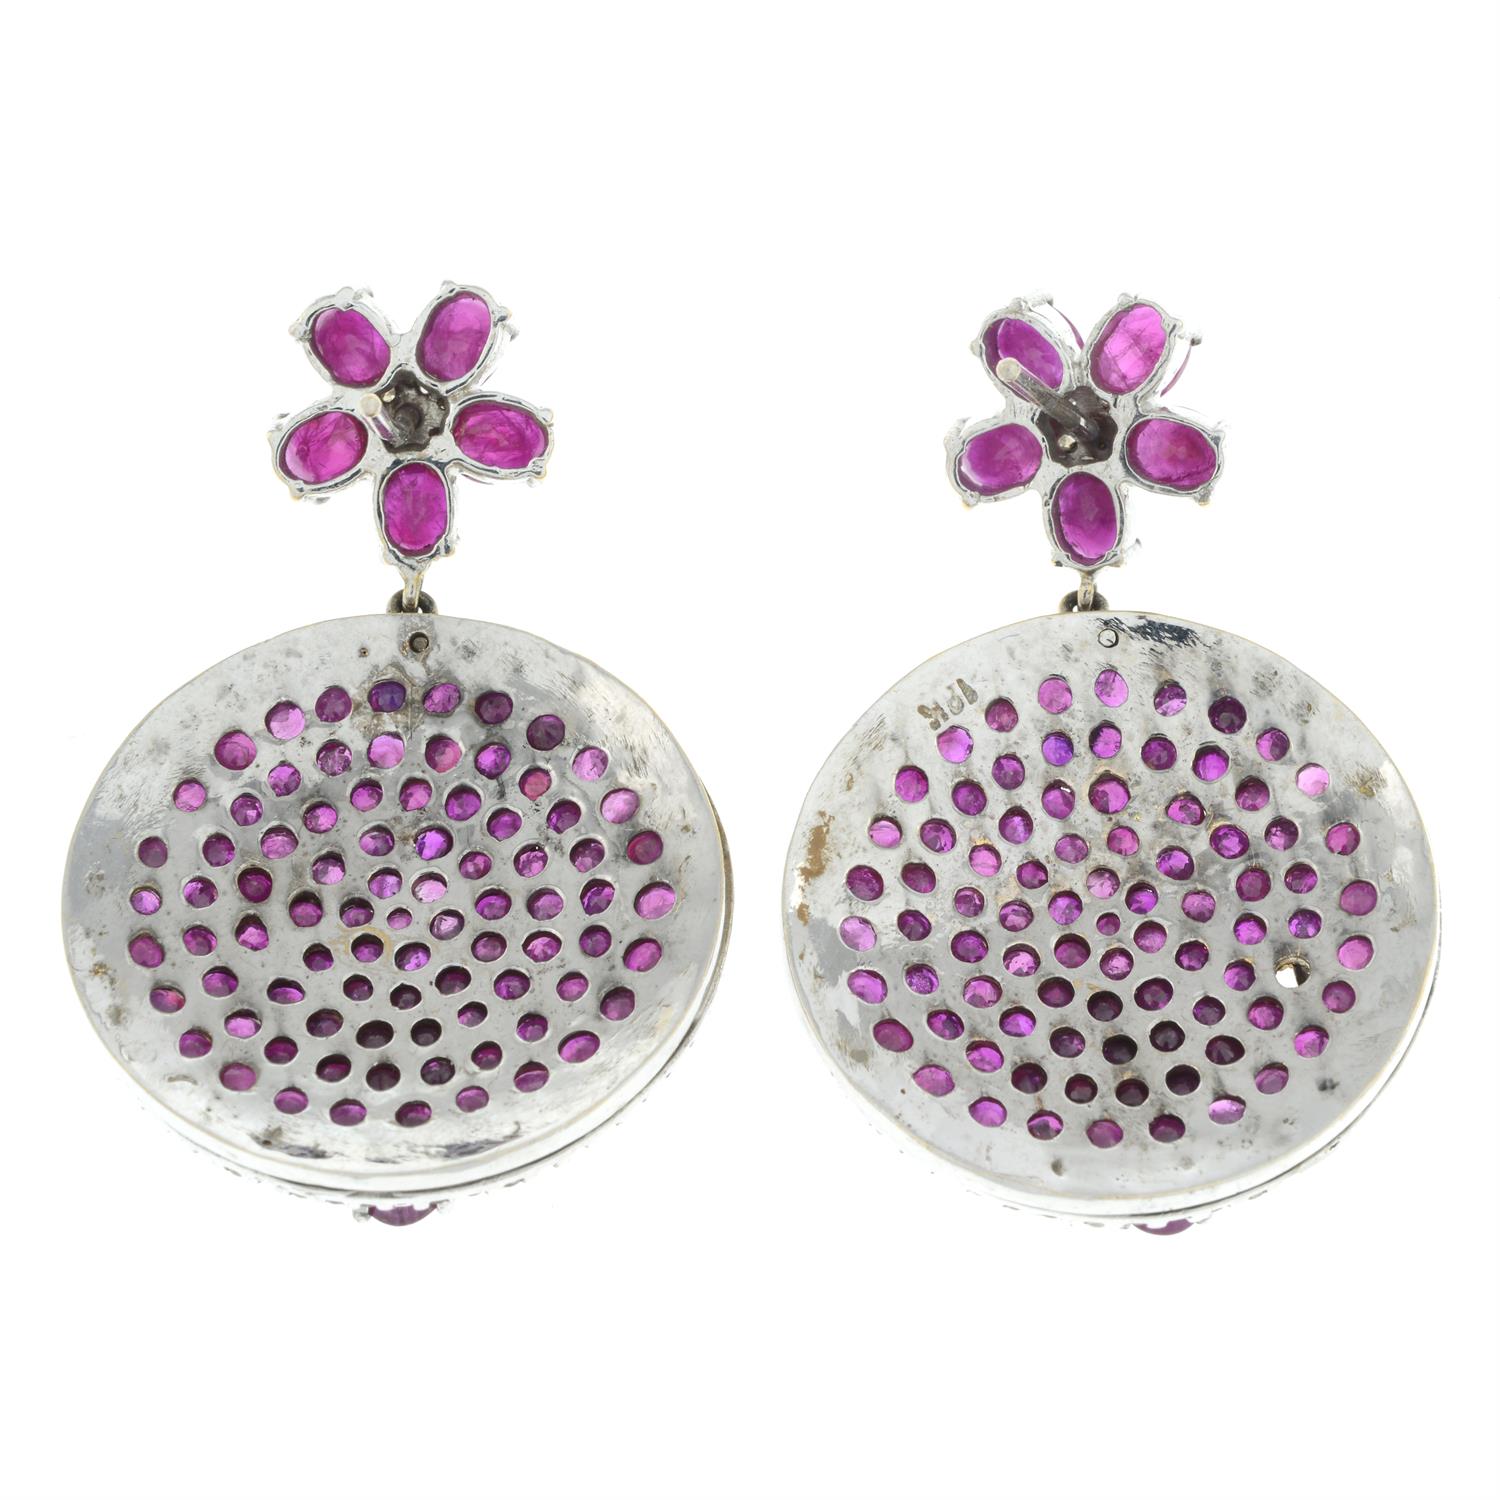 Ruby and diamond floral earrings - Image 3 of 4